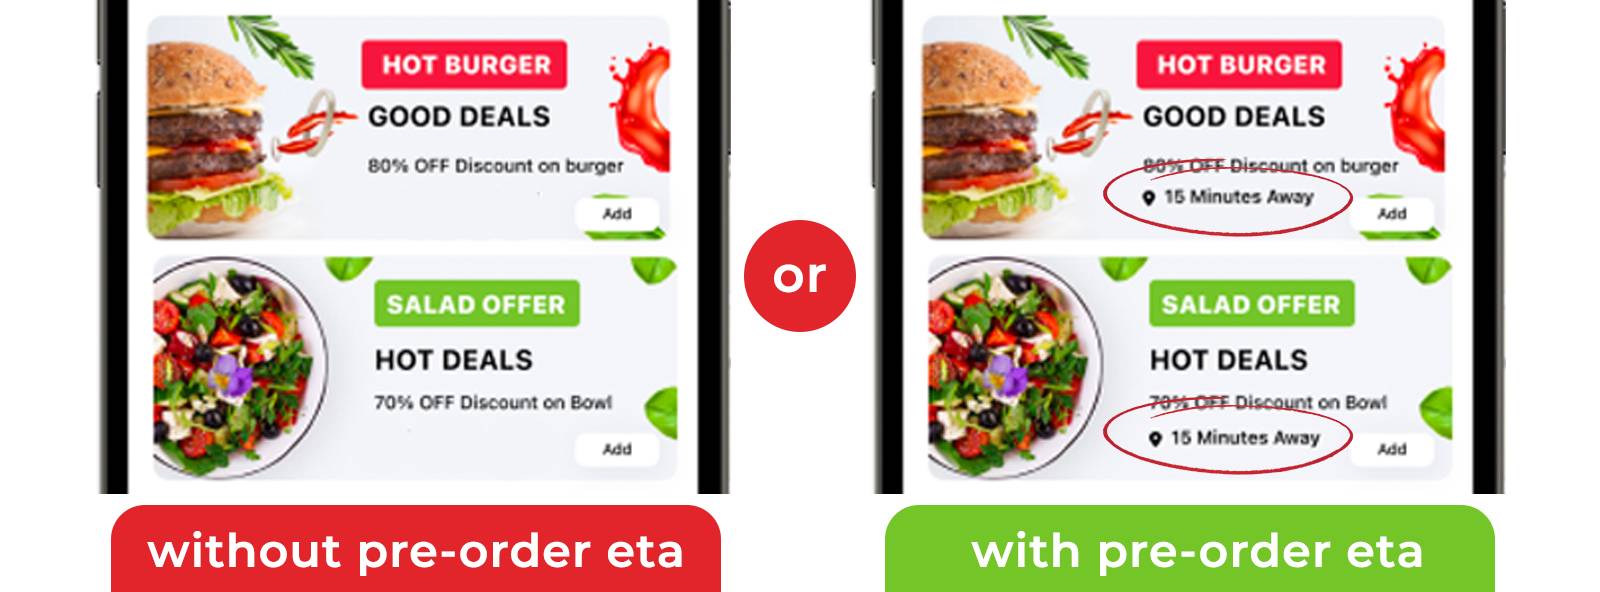 Food delivery with pre-order ETA for improved customer experience for last mile delivery